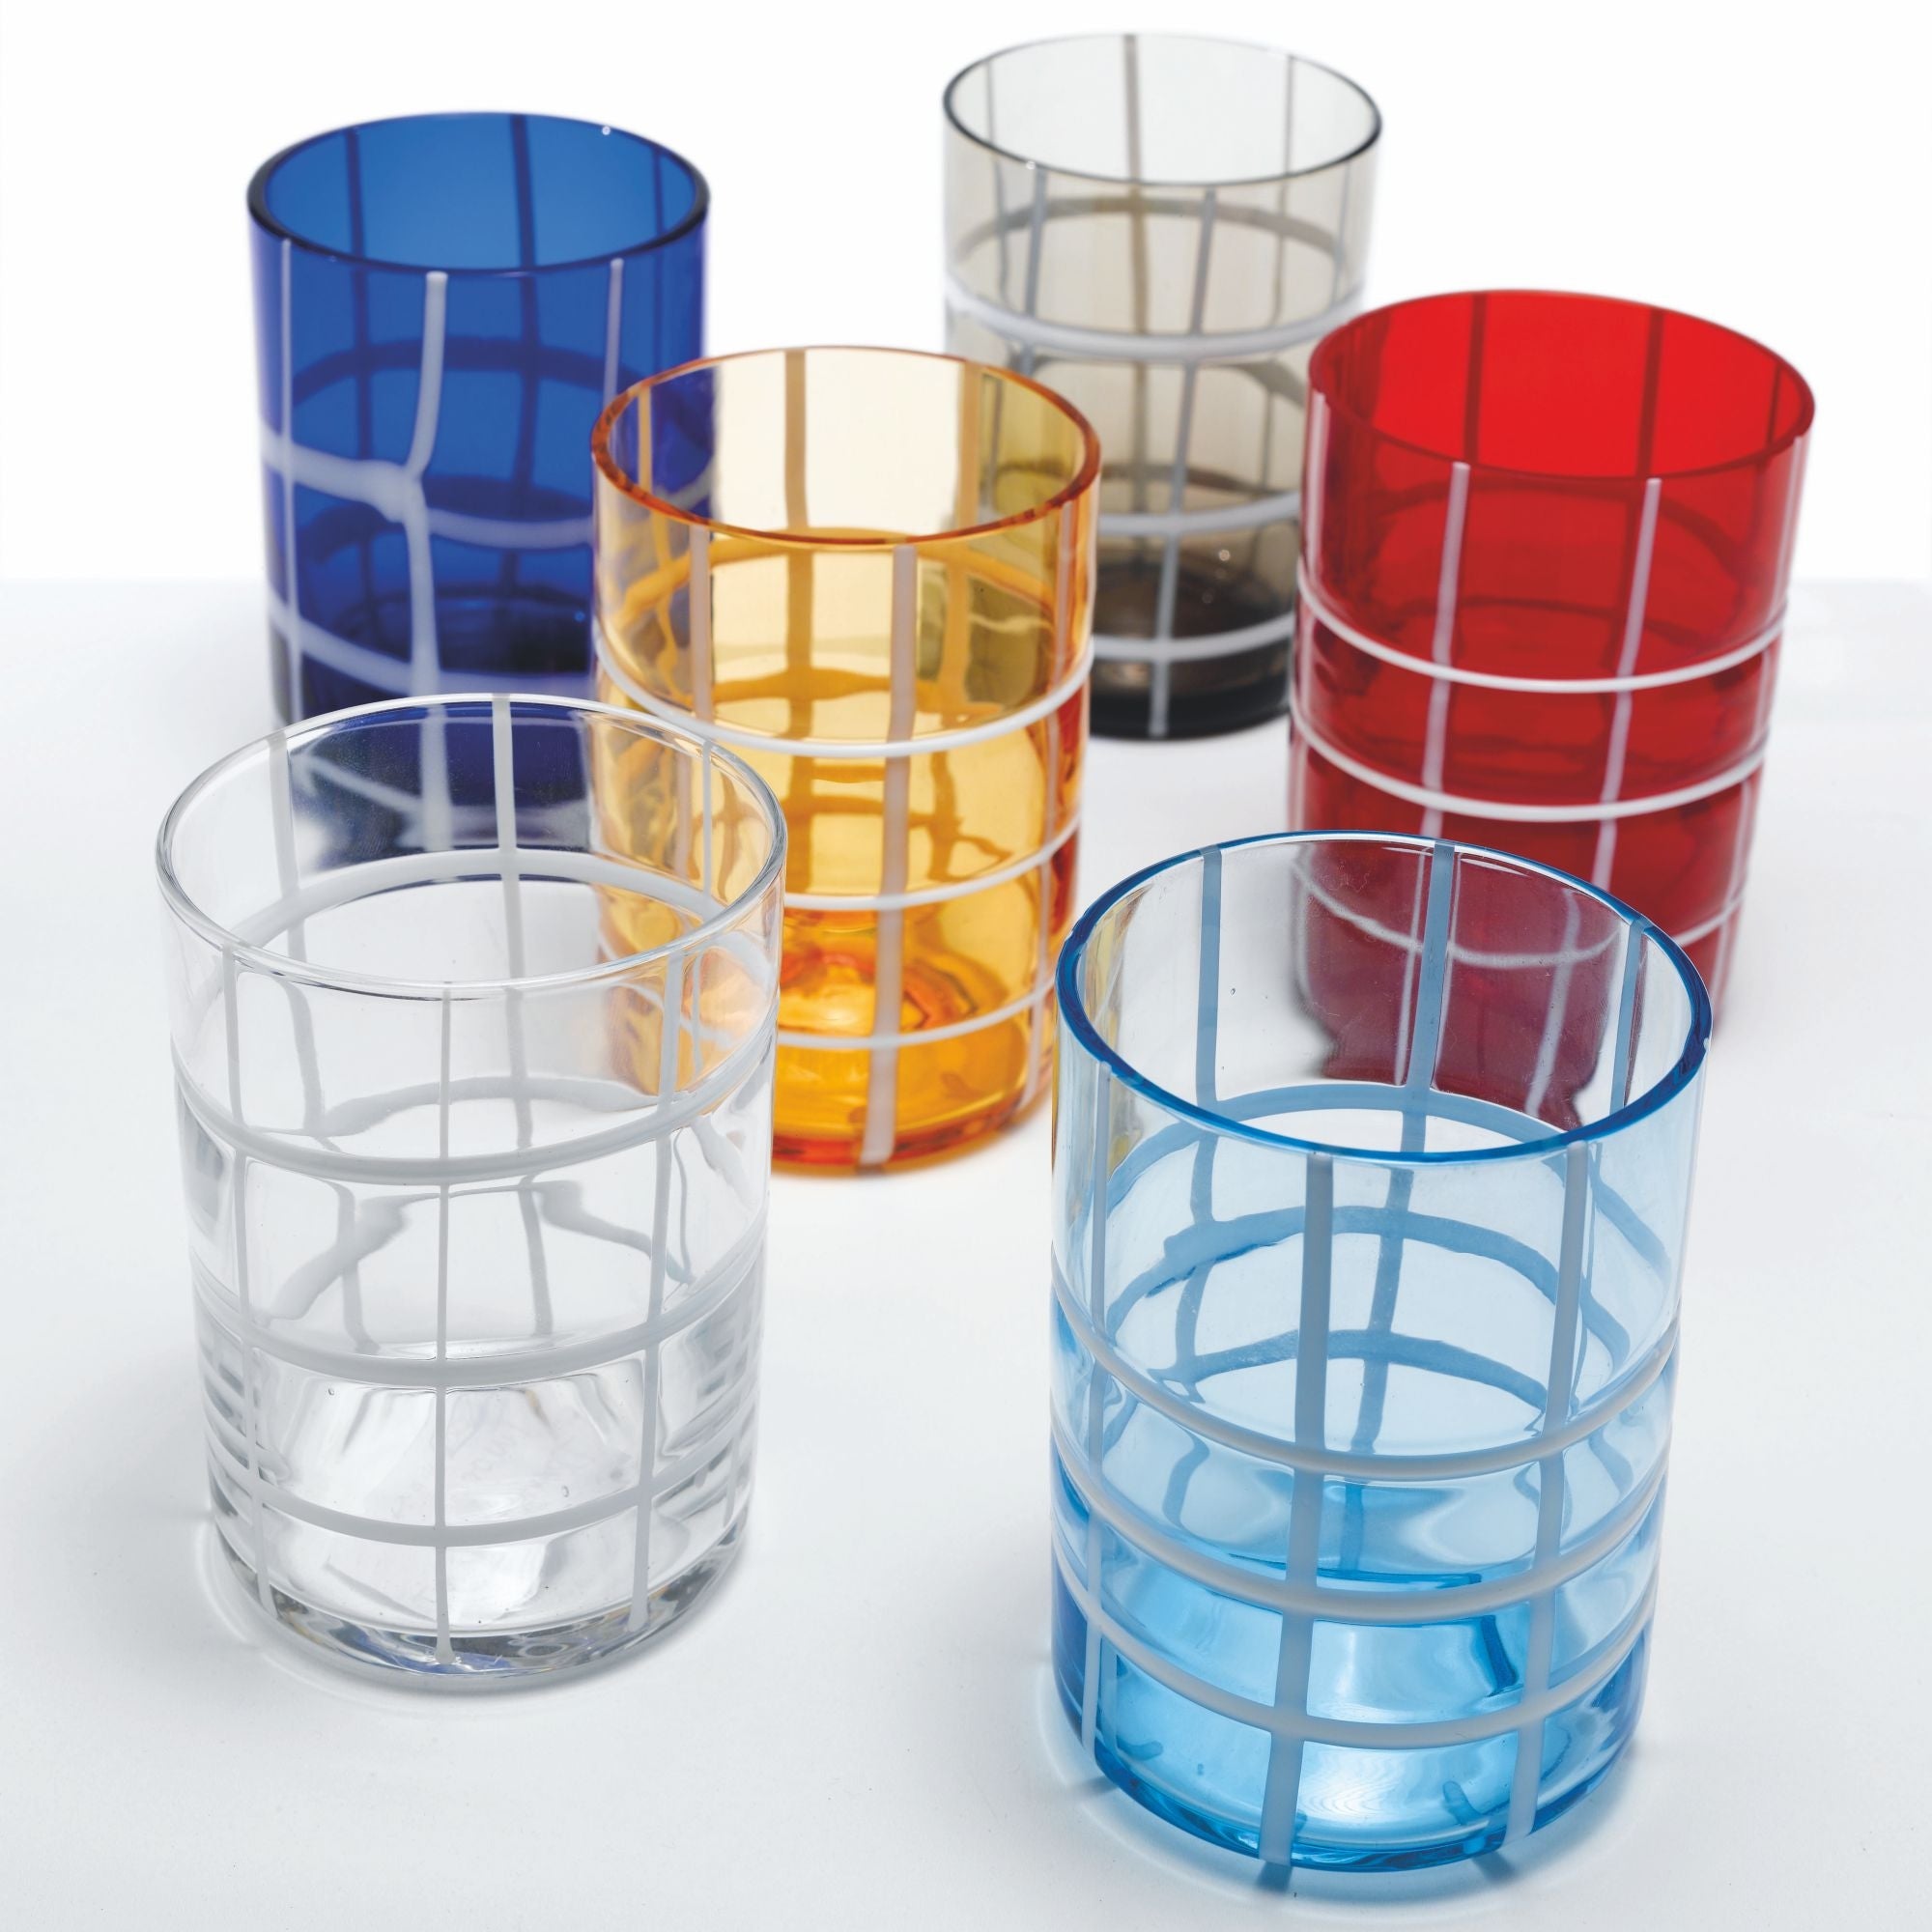 Zafferano Twiddle Set 6 Glasses in assorted colors